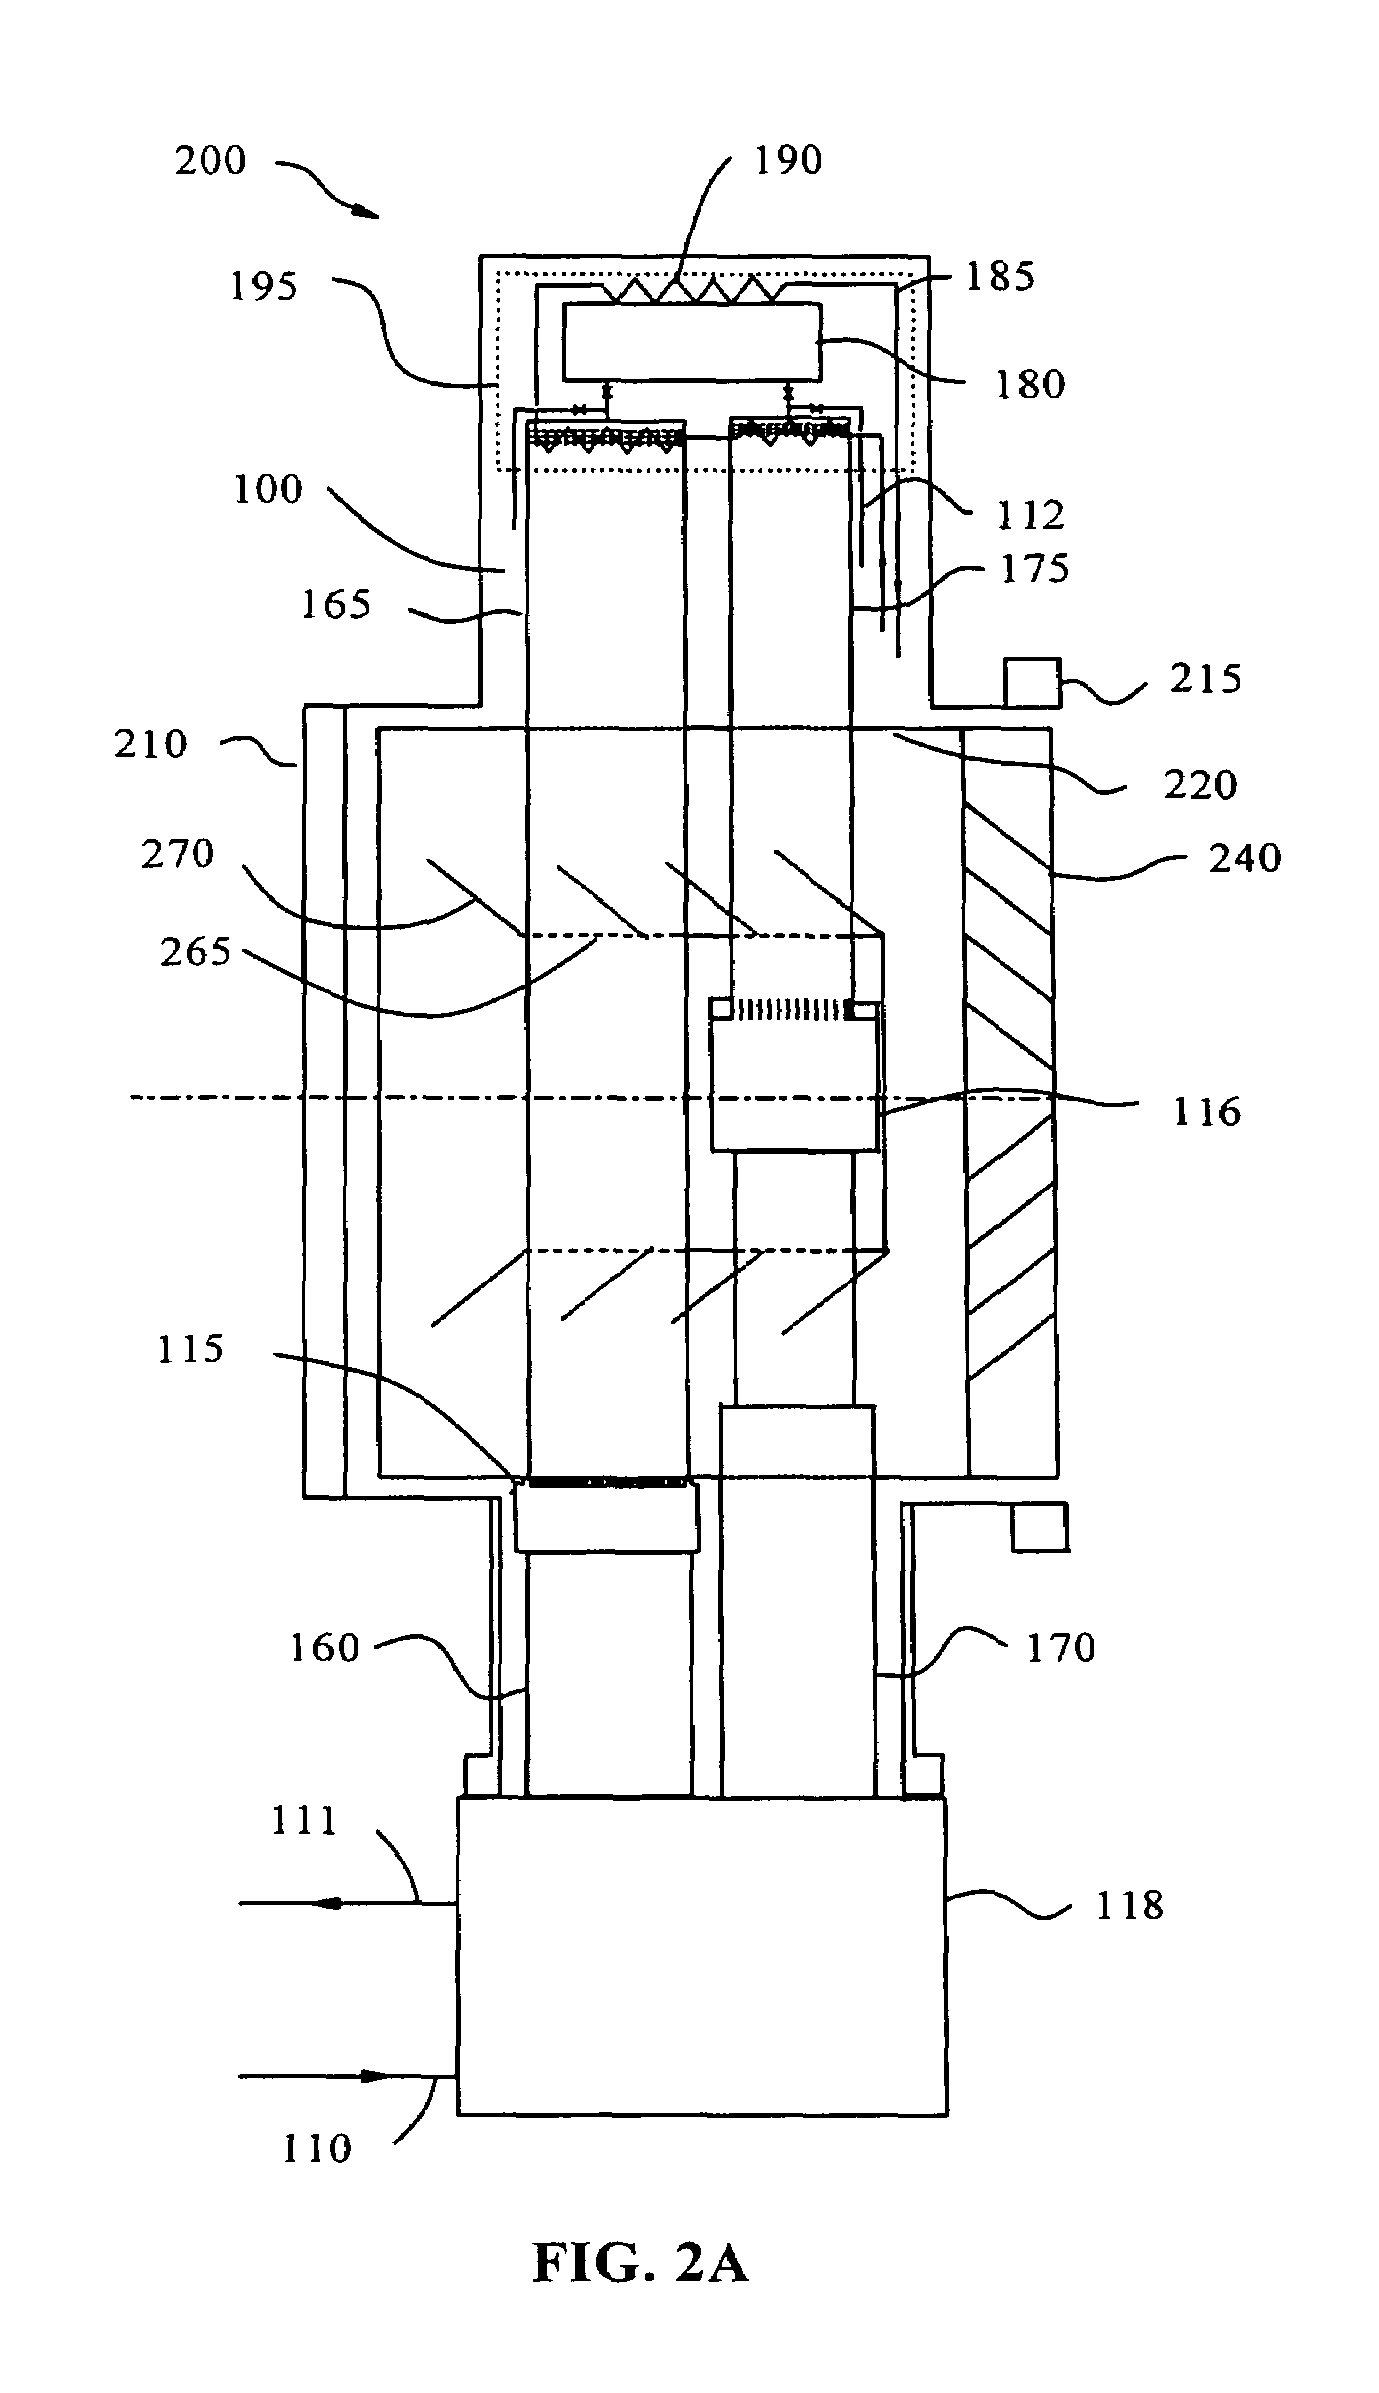 Cryopump with two-stage pulse tube refrigerator